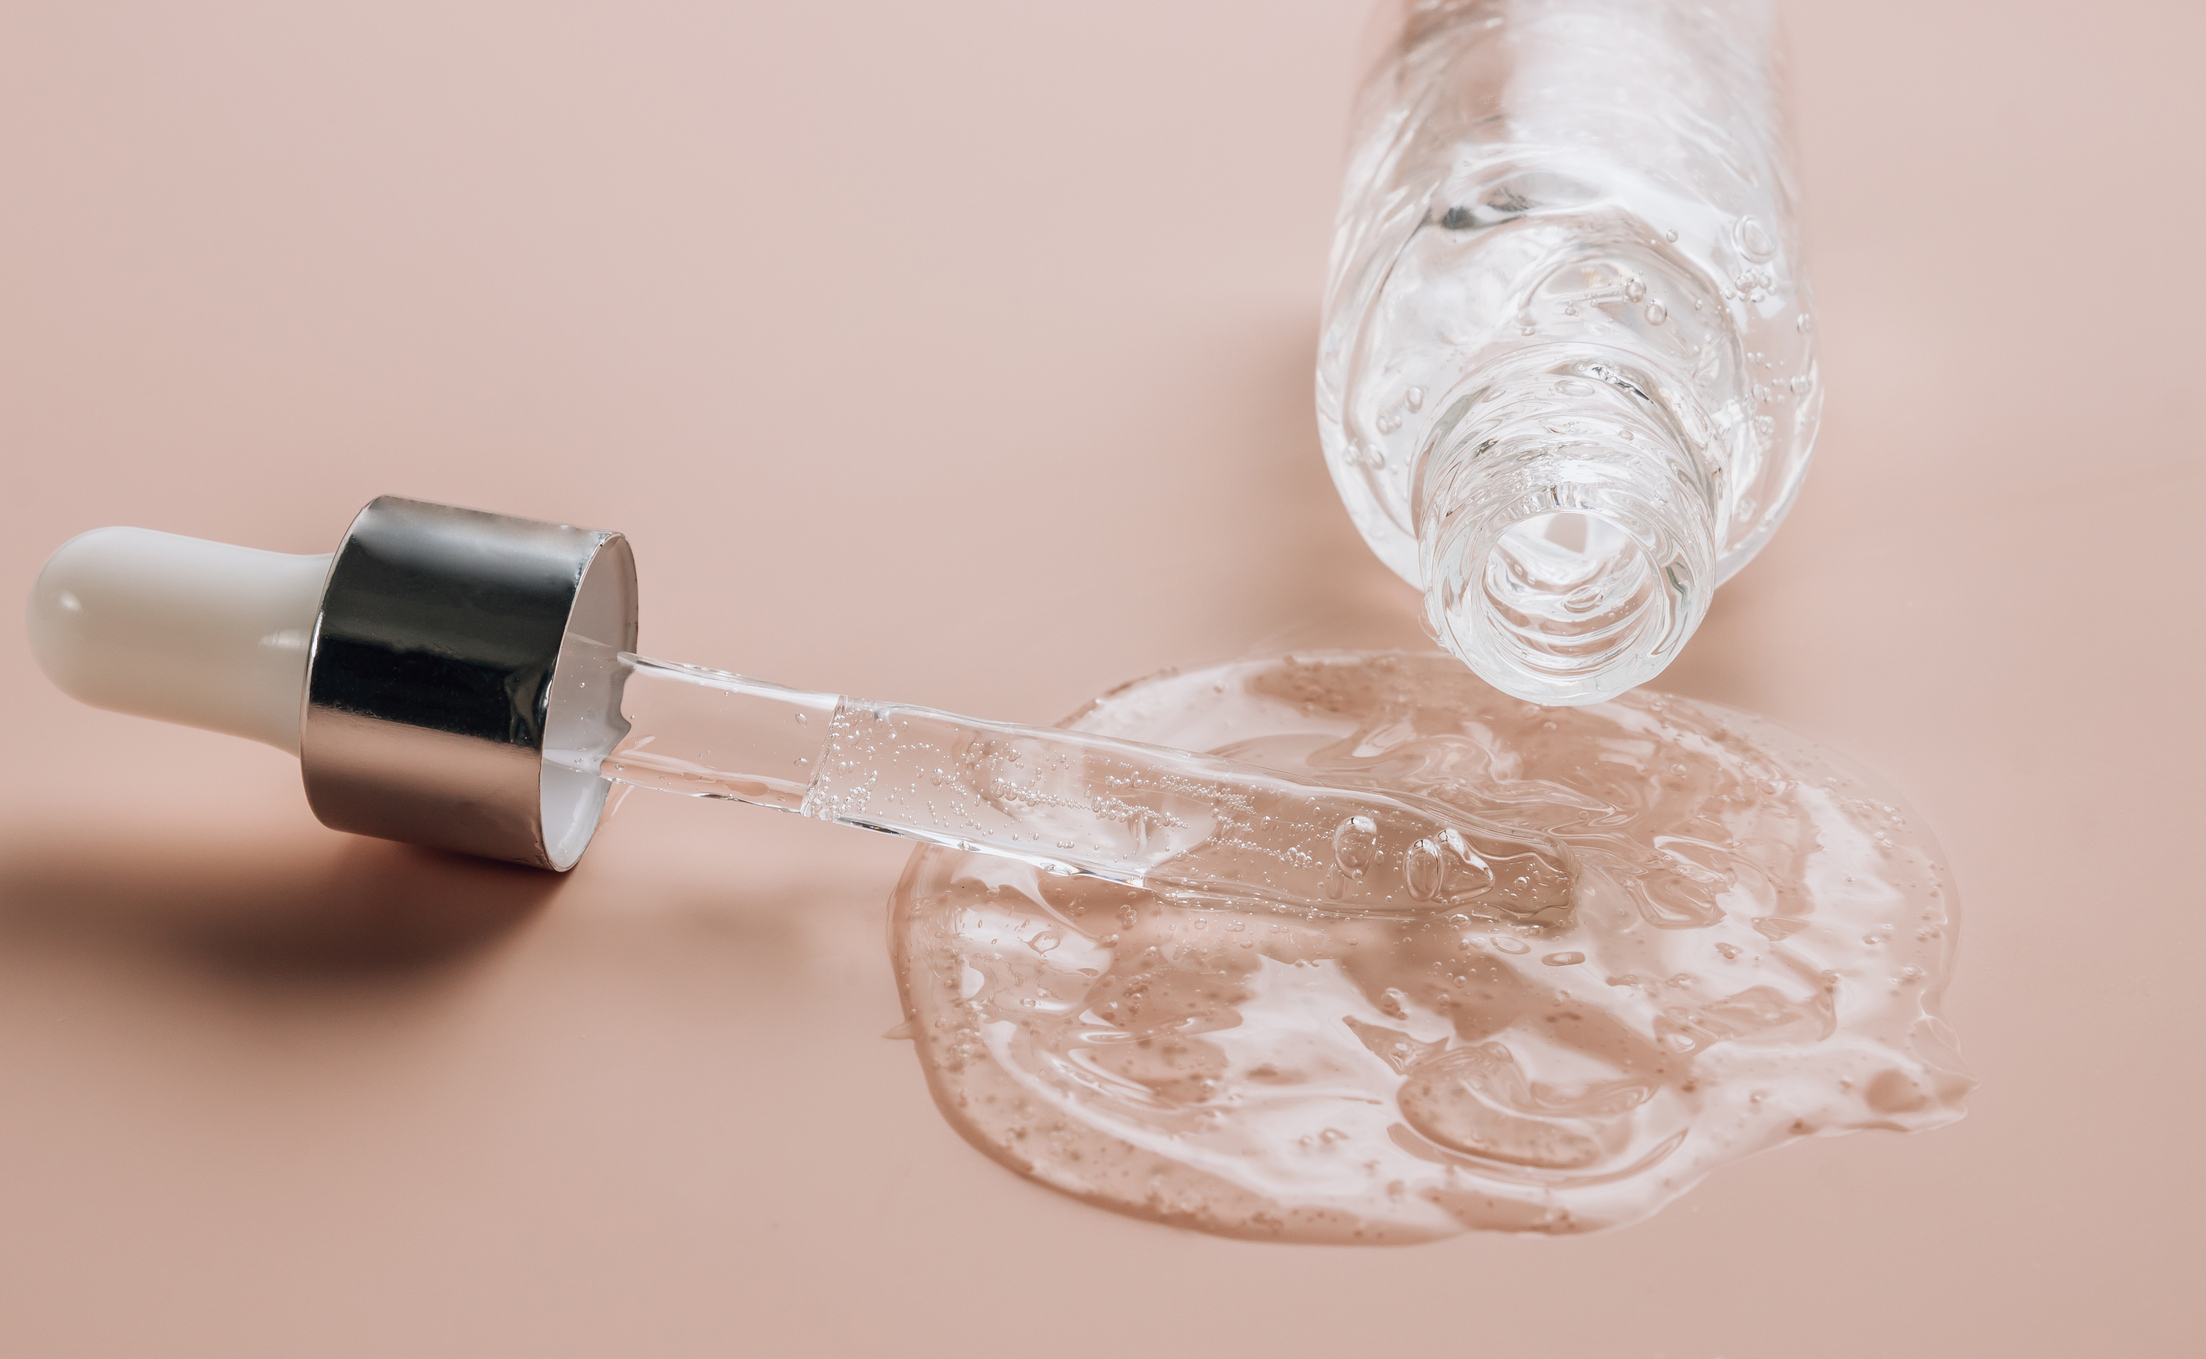 Why hyaluronic acid is an “essential ingredient in skin care today”